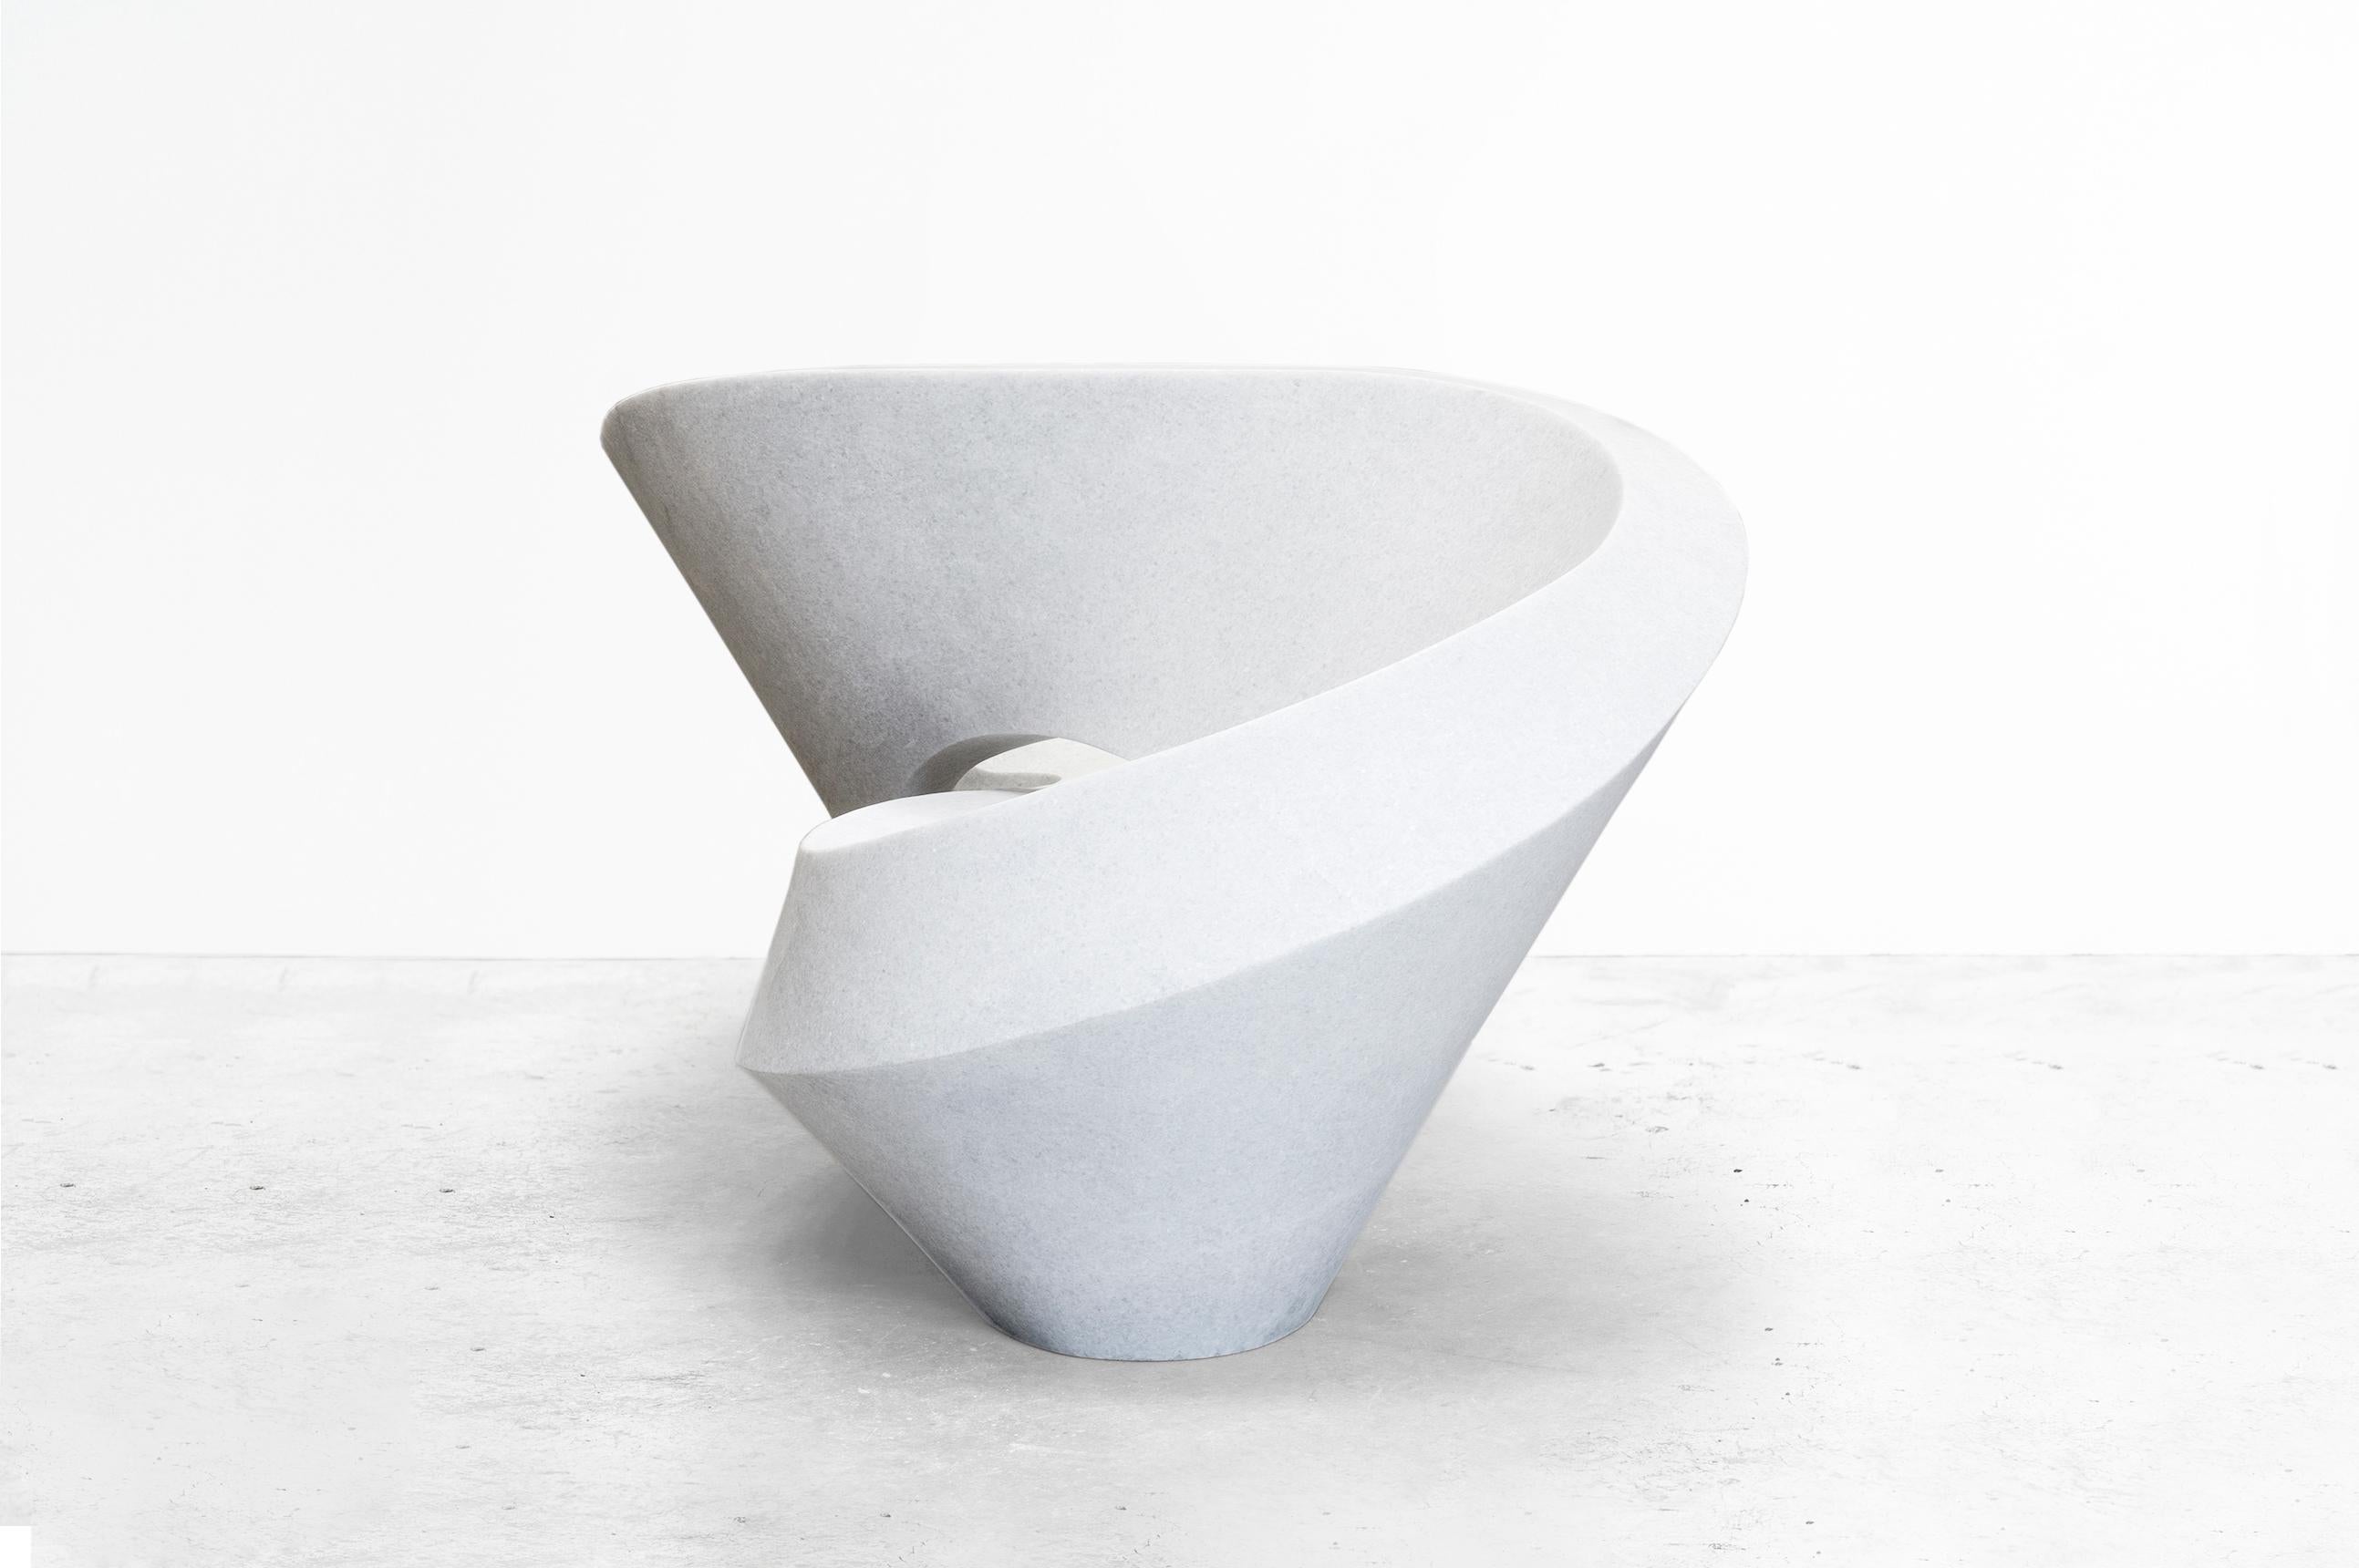 Pedro Reyes

Infinity chair
Manufactured by Pedro Reyes
Mexico, 2018
White marble

Edition:
Edition of 5 + 2 AP.

Measurements:
200 cm x 95 cm x 85 H cm
78.74 in x 37.40 in x 33.46 H in

Biography:
Through a varied practice utilizing